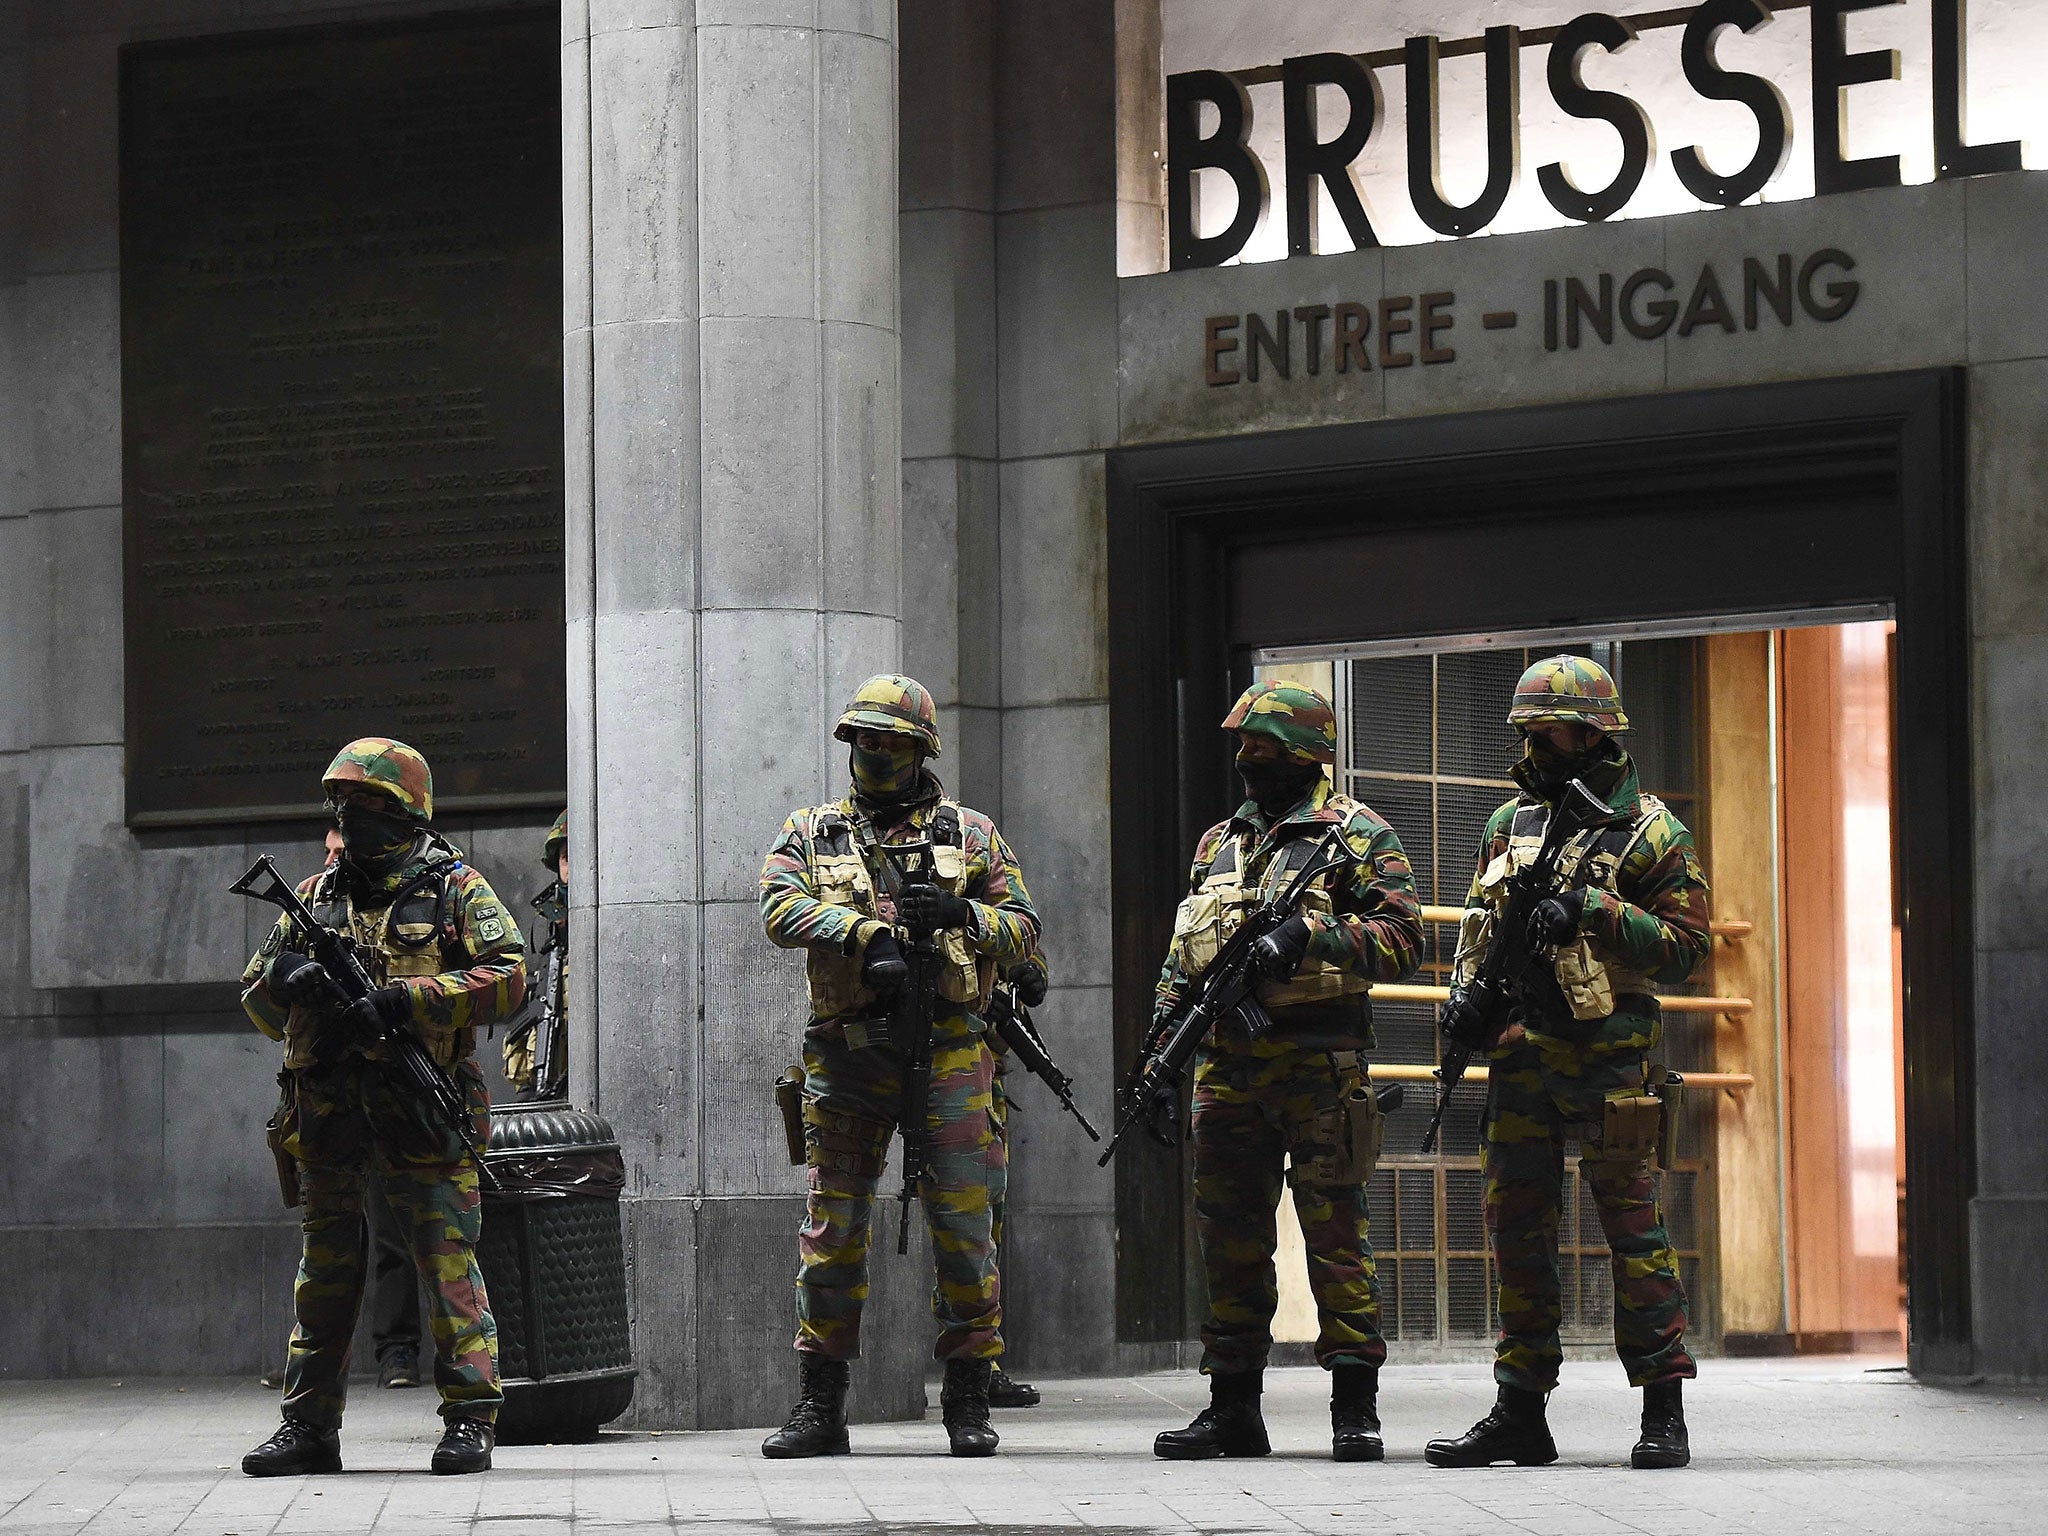 Soldiers stand guard in front of the central train station in Brussels, as the Belgian capital remained on the highest security alert level over fears of a Paris-style attack